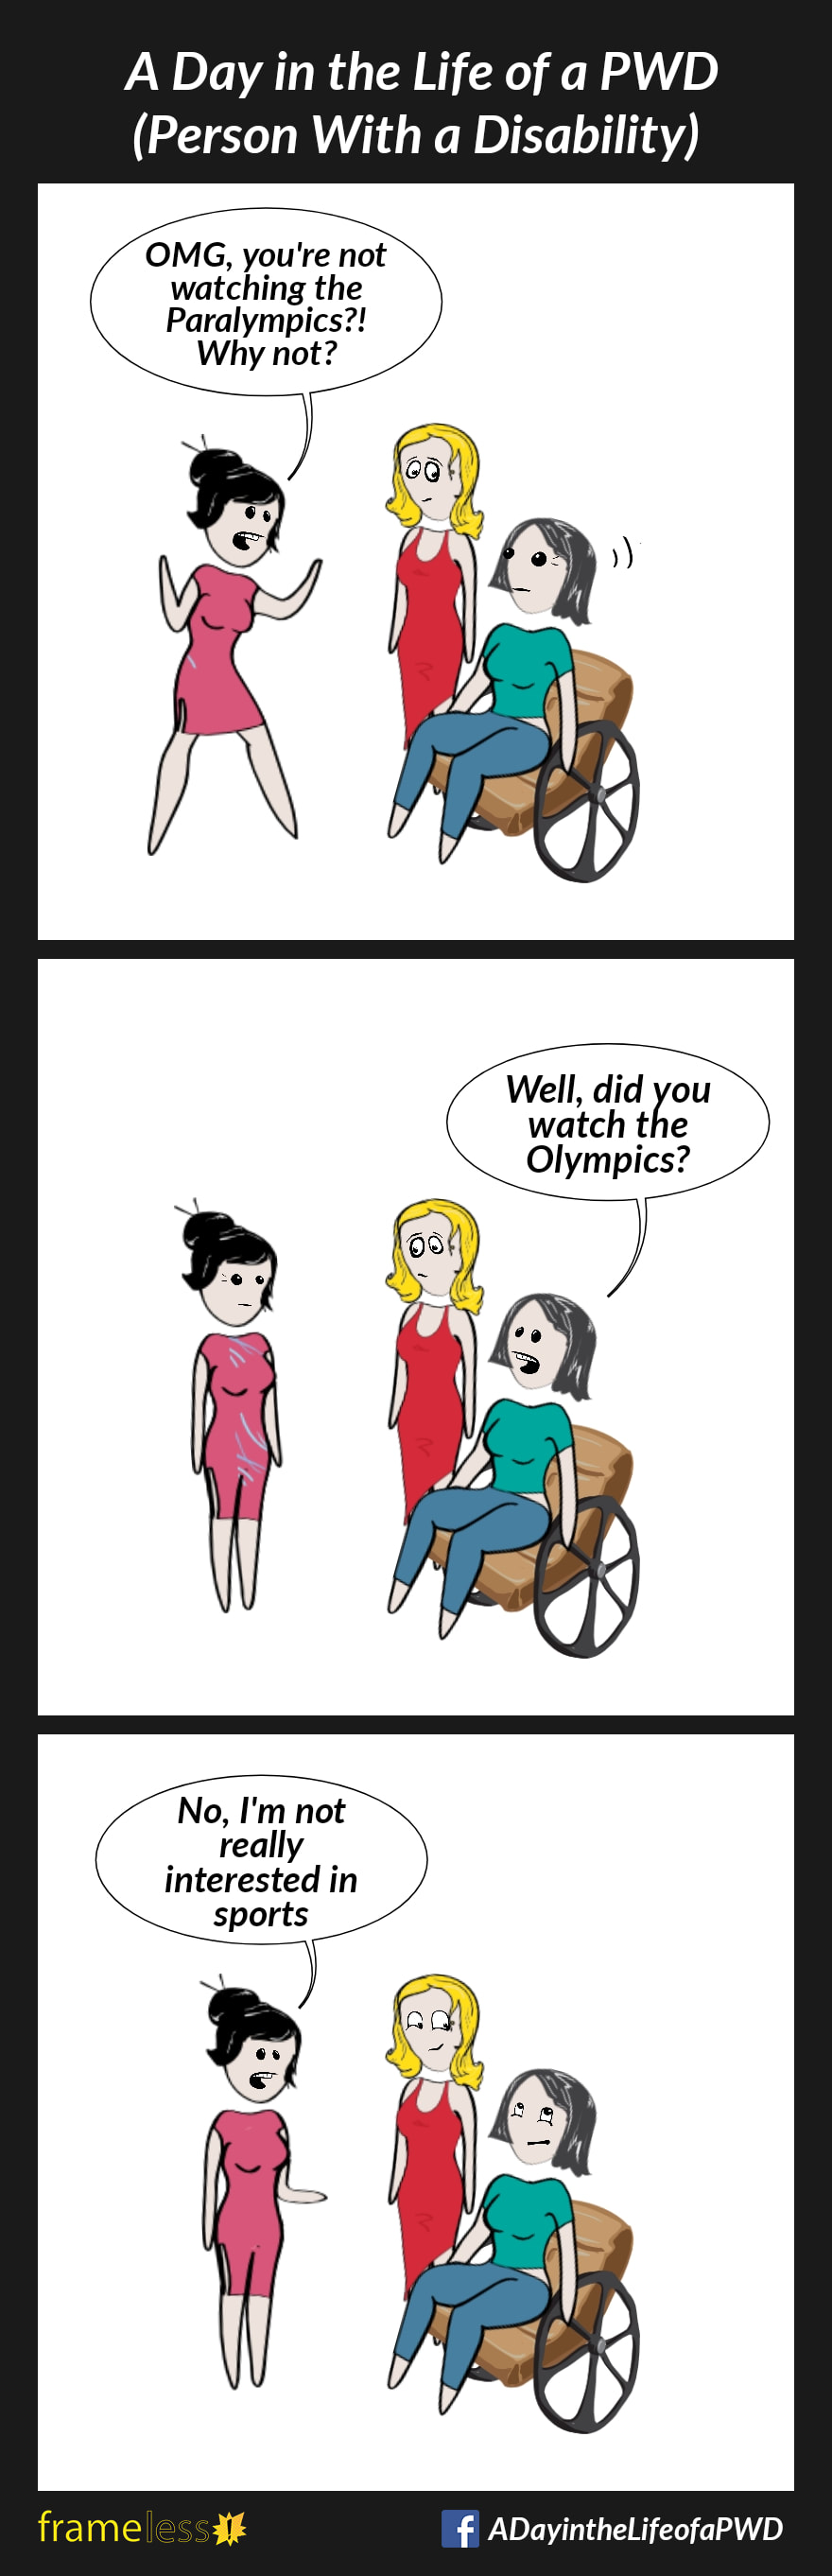 COMIC STRIP 
A Day in the Life of a PWD (Person With a Disability) 

Frame 1:
A woman in a wheelchair and her friend are chatting with an acquaintance. 
ACQUAINTANCE: You're not watching the Paralympics?! Why not?

Frame 2:
WOMAN: Well, did you watch the Olympics?

Frame 3:
ACQUAINTANCE: No, I'm not really interested in sports. 